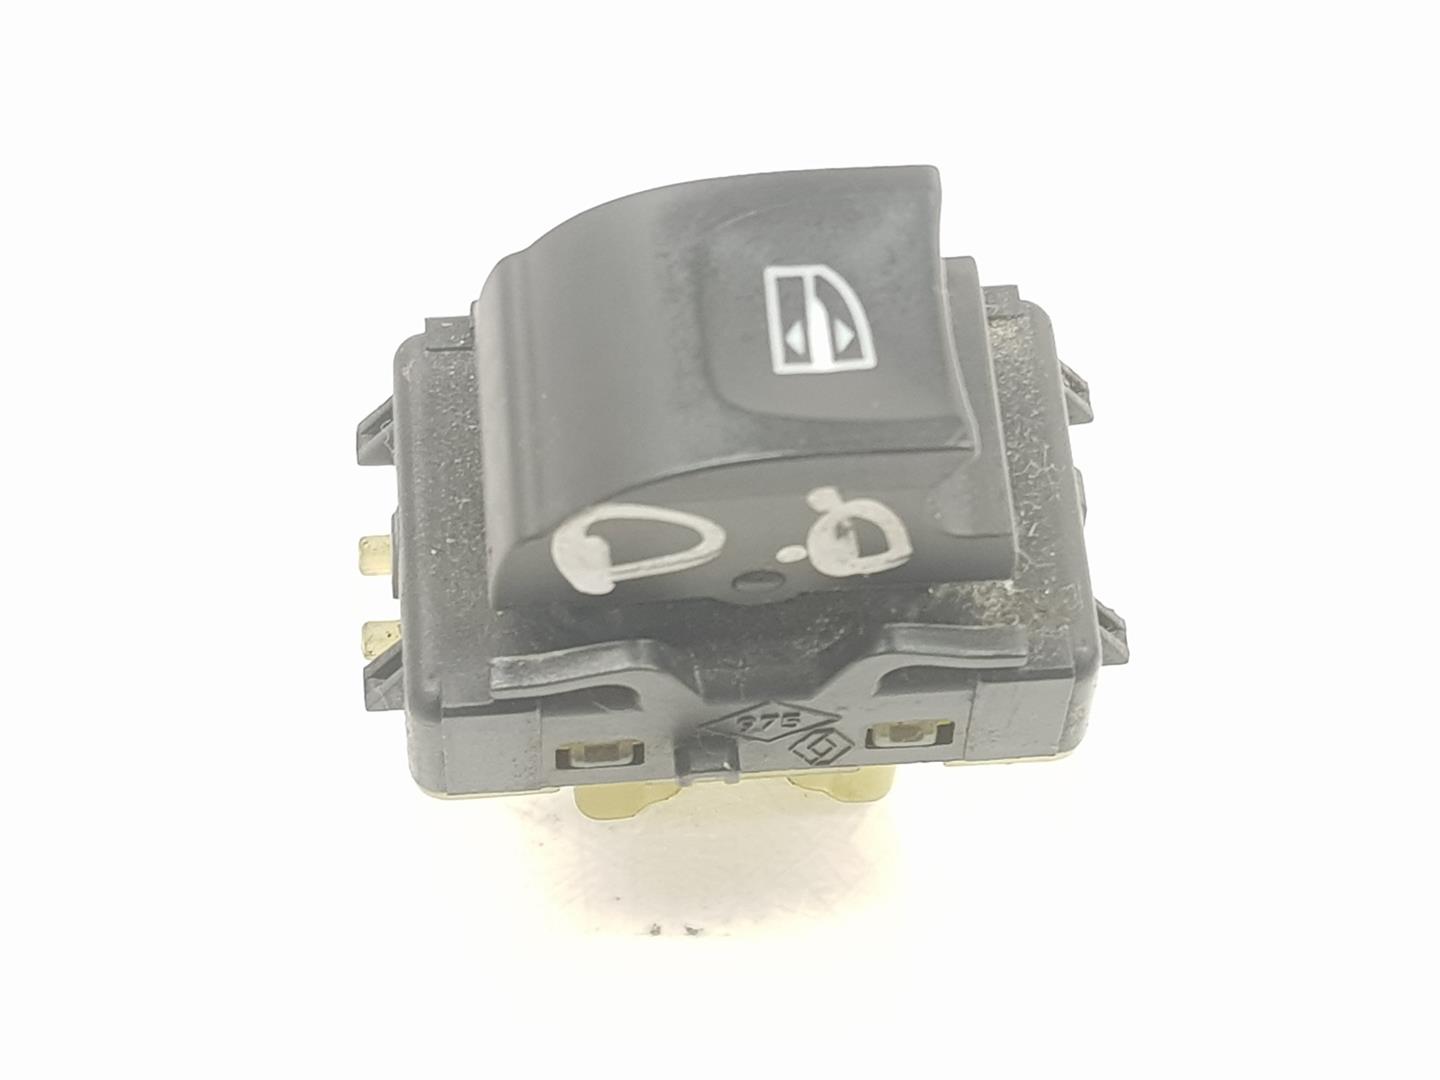 RENAULT Trafic 2 generation (2001-2015) Front Right Door Window Switch 254218614R, 254218614R 24222305